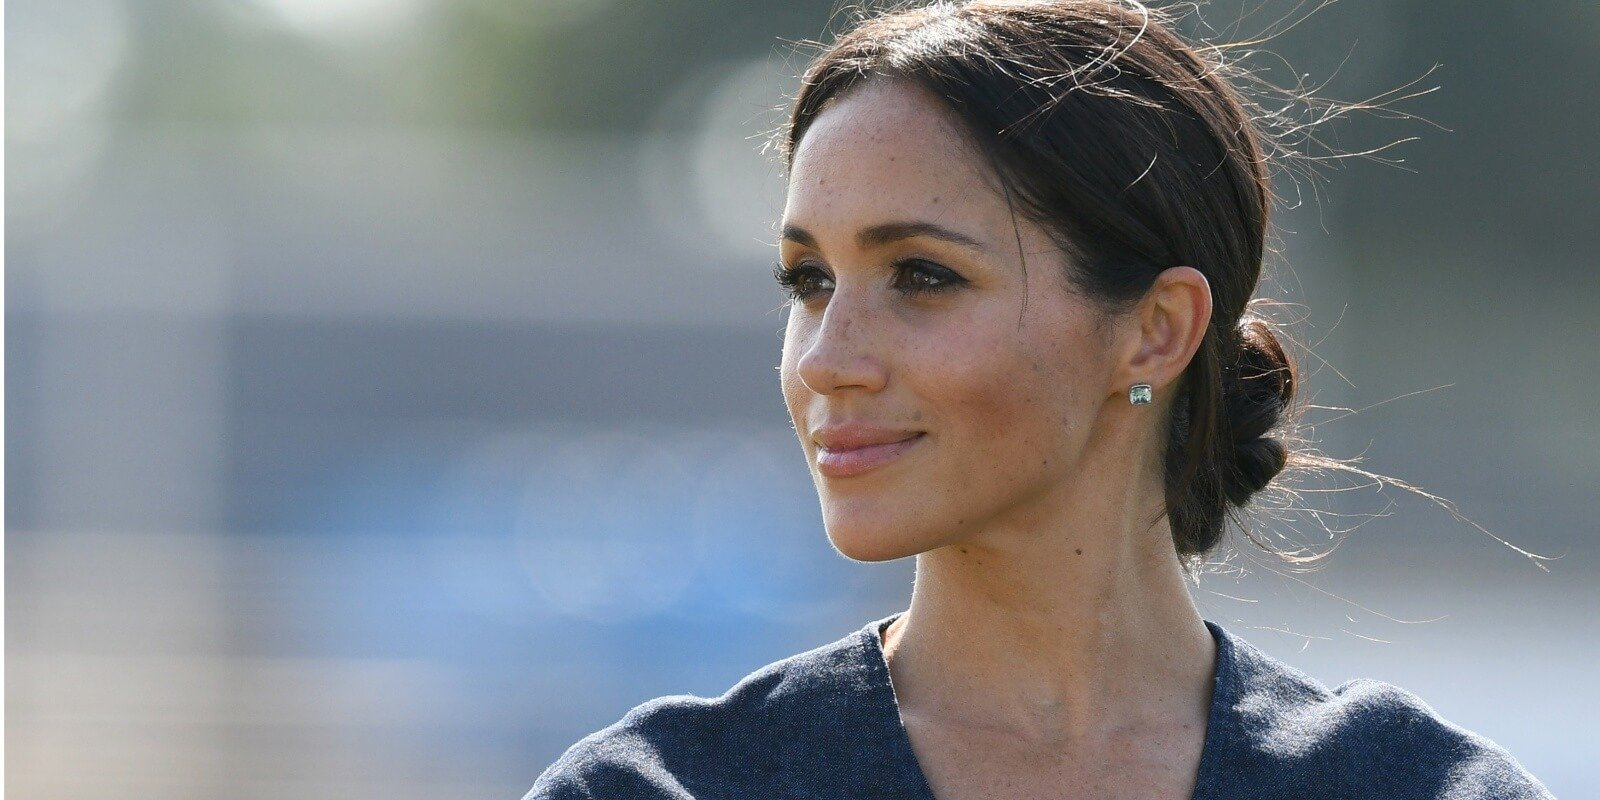 Meghan Markle debuted a bold new look when introducing friend Missan Harriman during his Ted Talk.